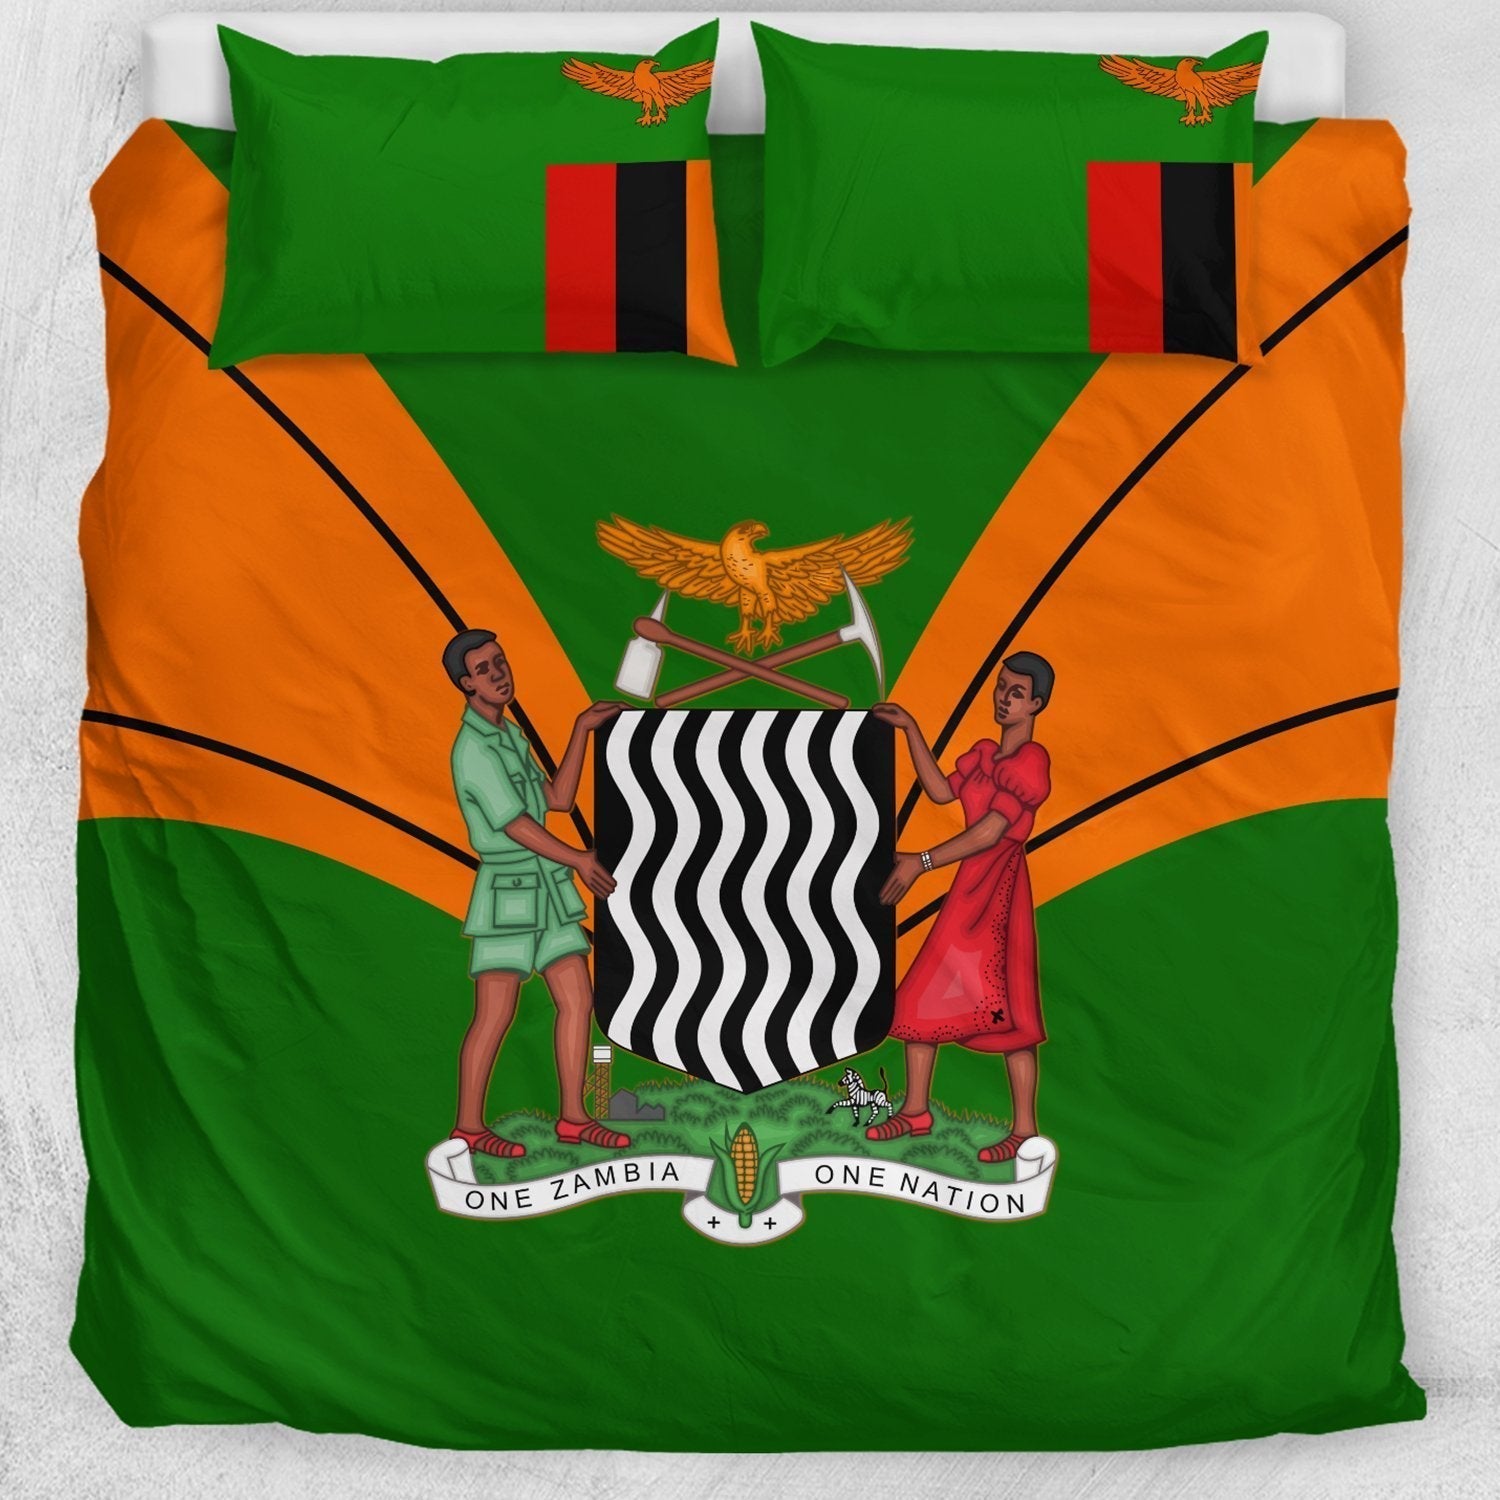 african-bedding-set-zambia-duvet-cover-pillow-cases-tusk-style